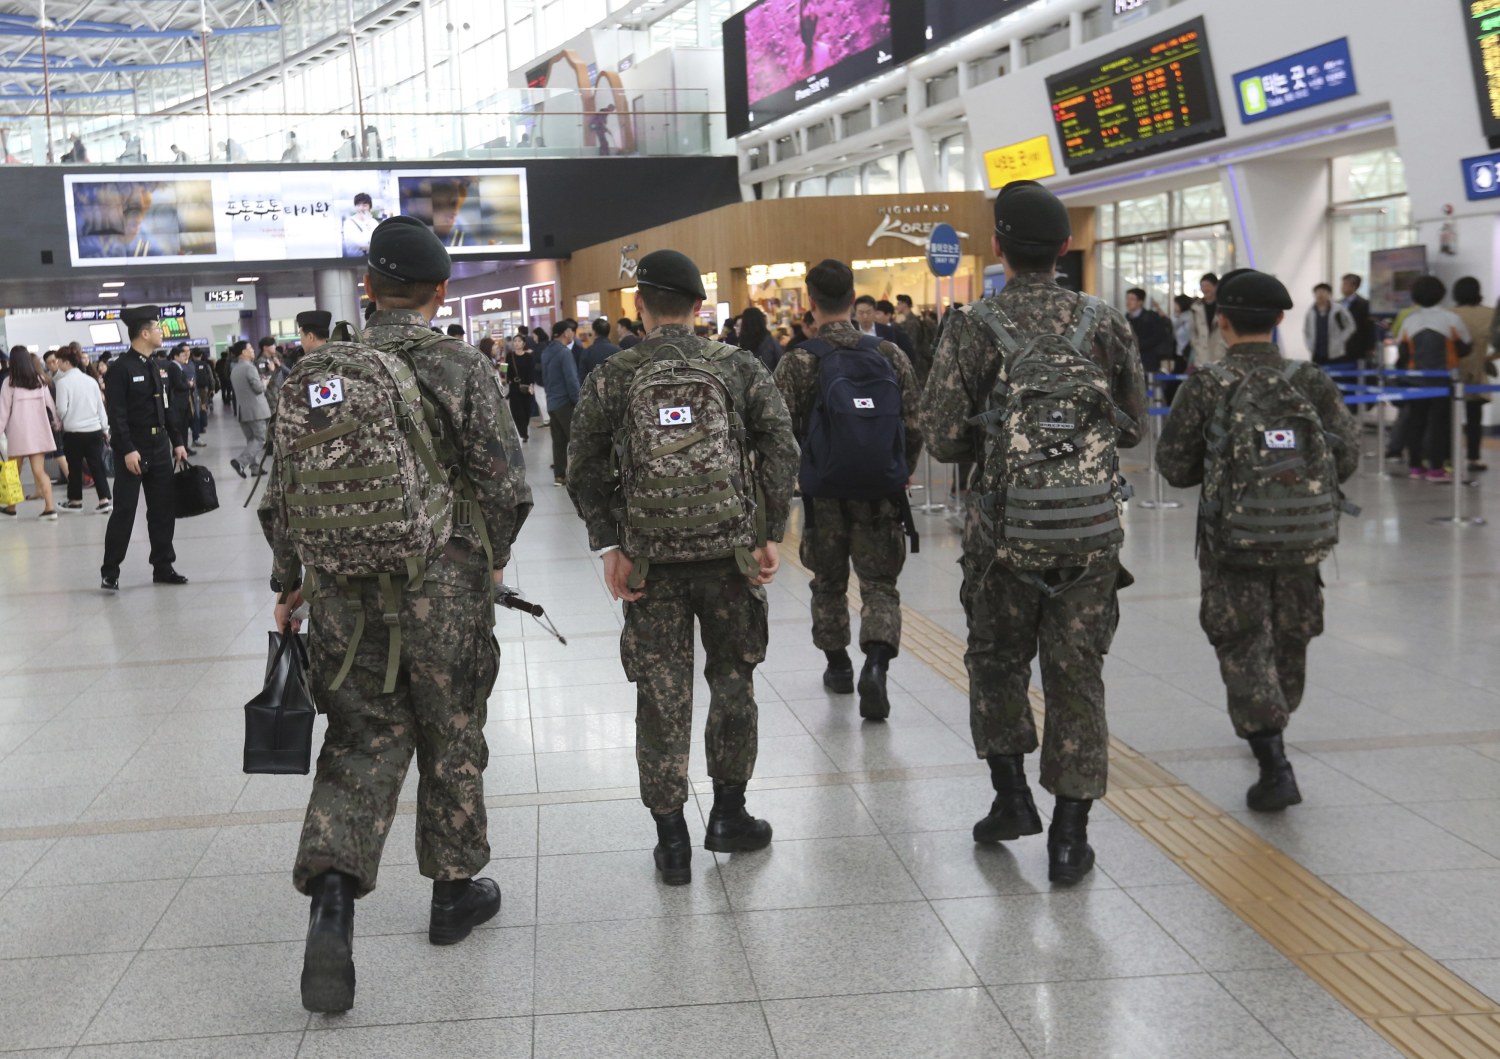 After Sex Video, South Korea Accused of Targeting Gay Soldiers